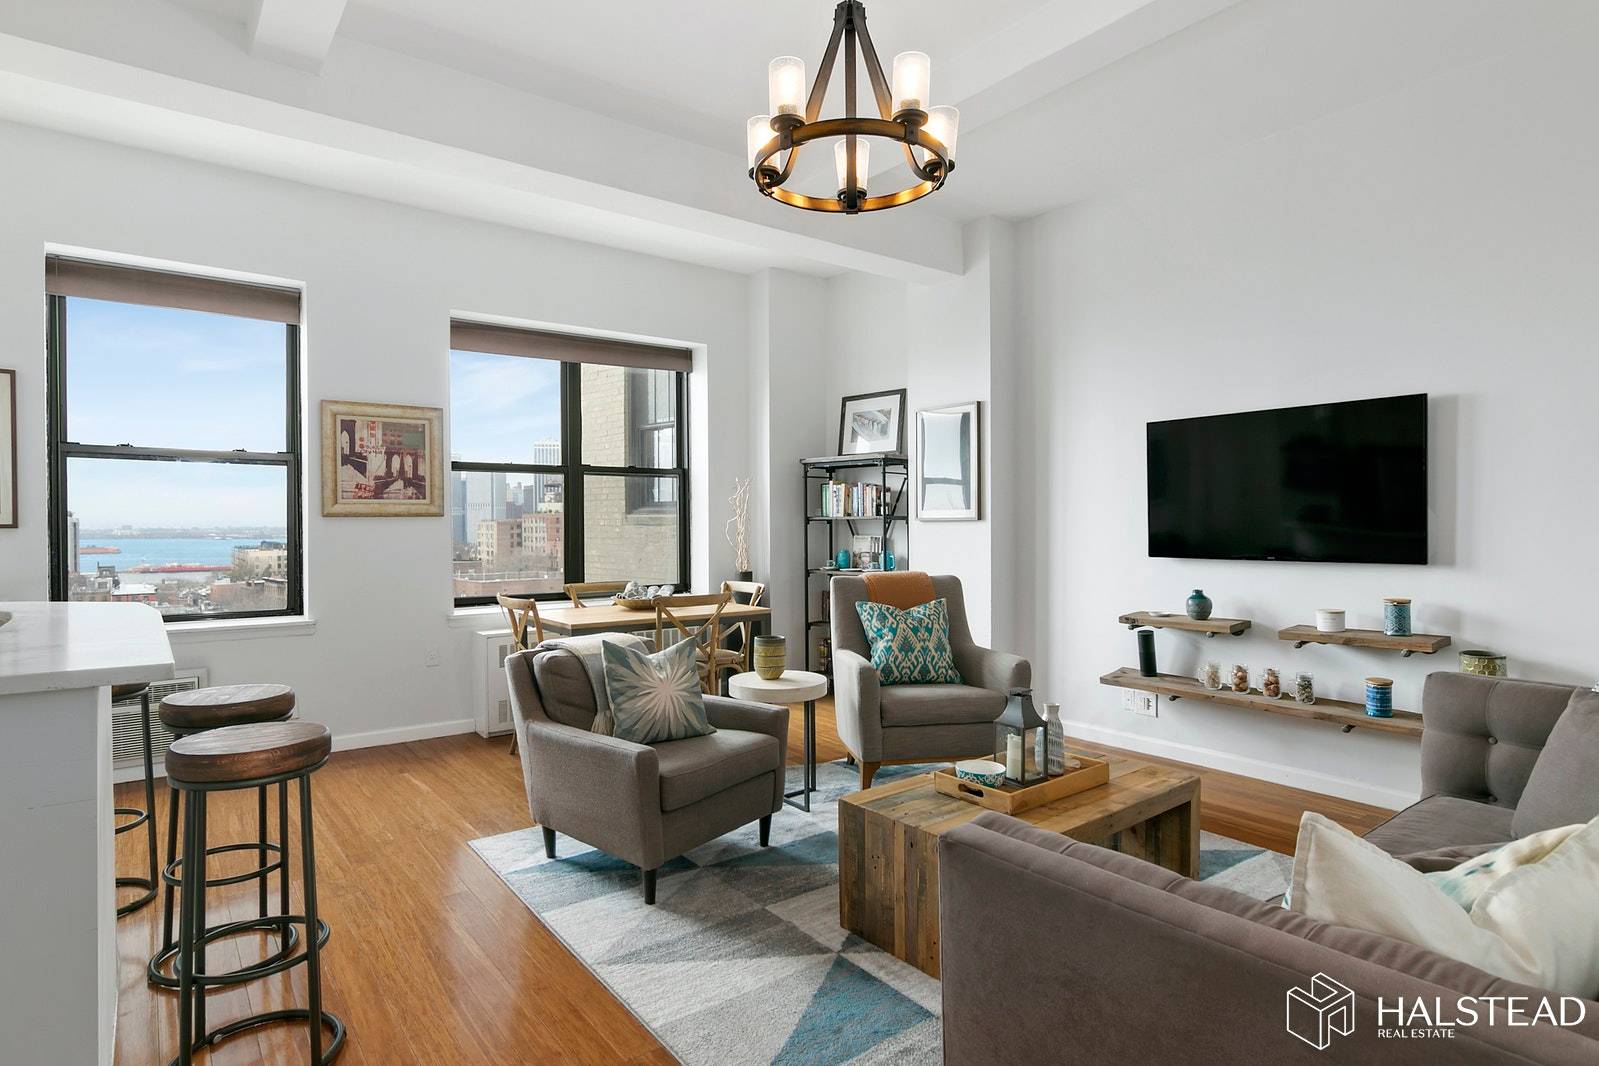 Prepare yourself for stunning open western views of lower Manhattan and the Statute of Liberty in this updated One Bedroom jewel in the heart of Brooklyn Heights.